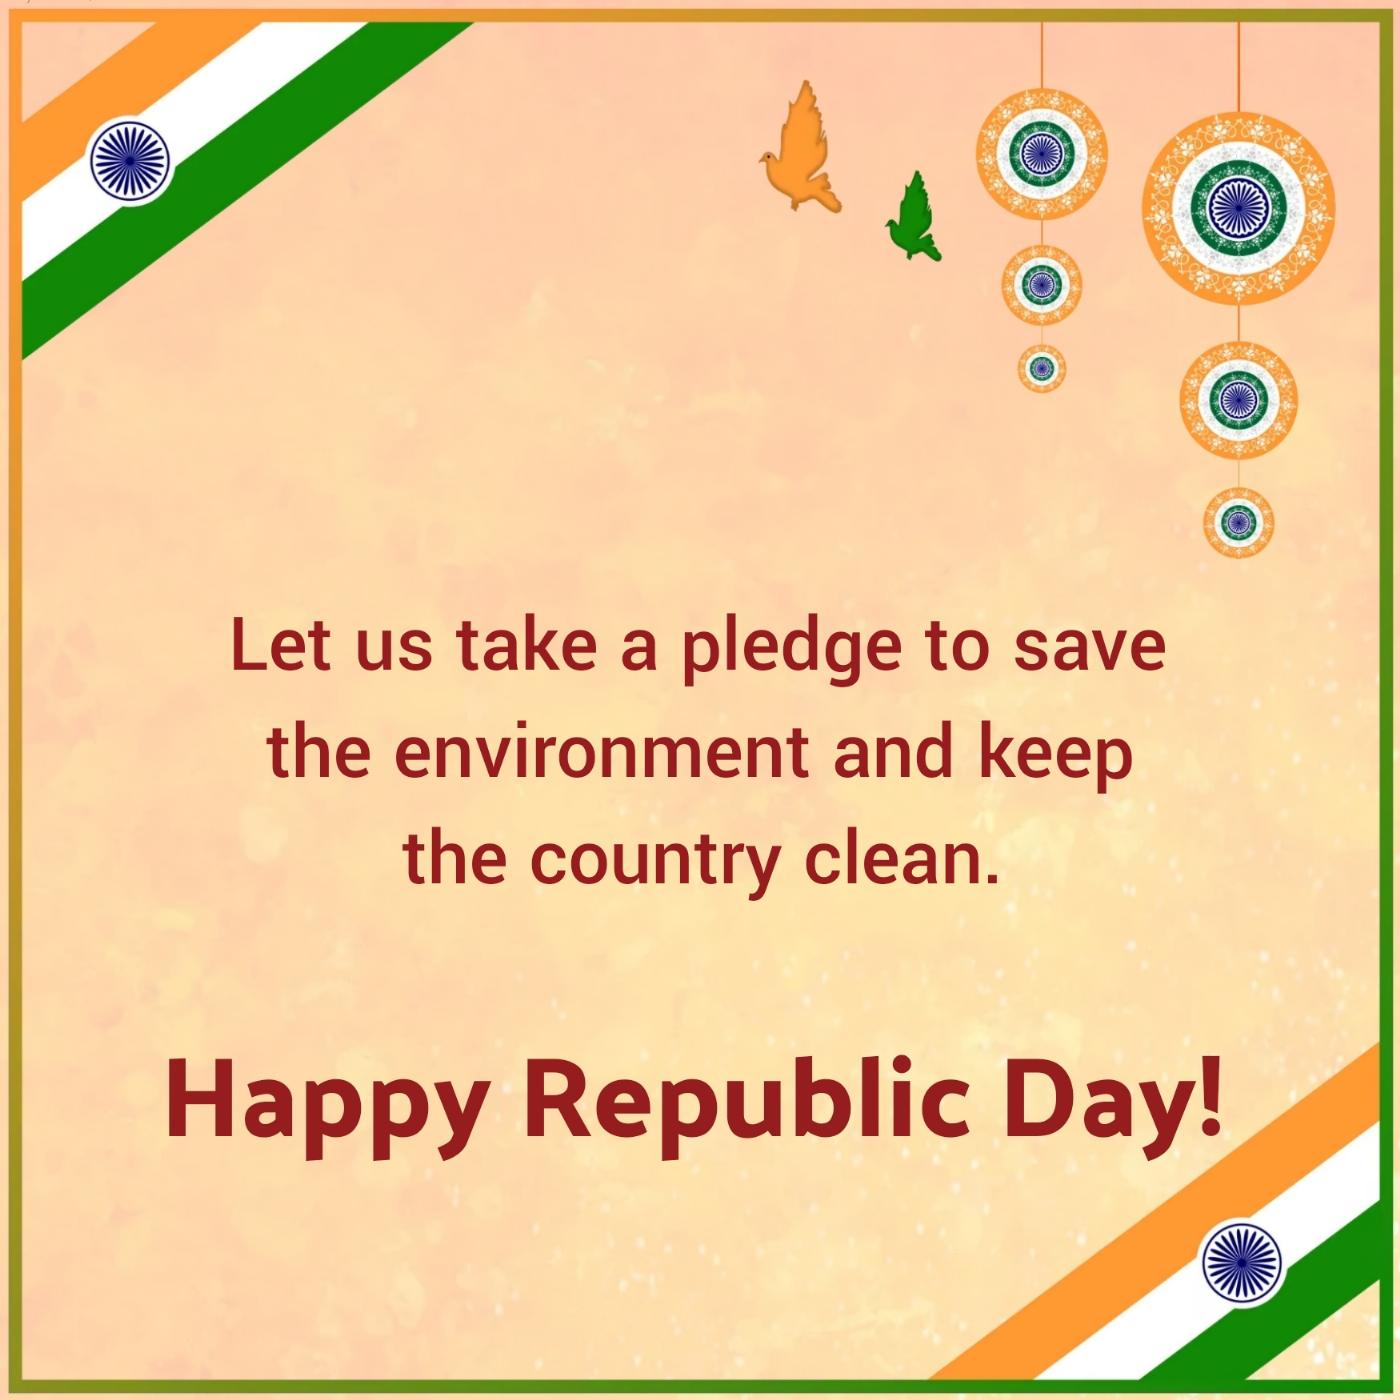 Let us take a pledge to save the environment